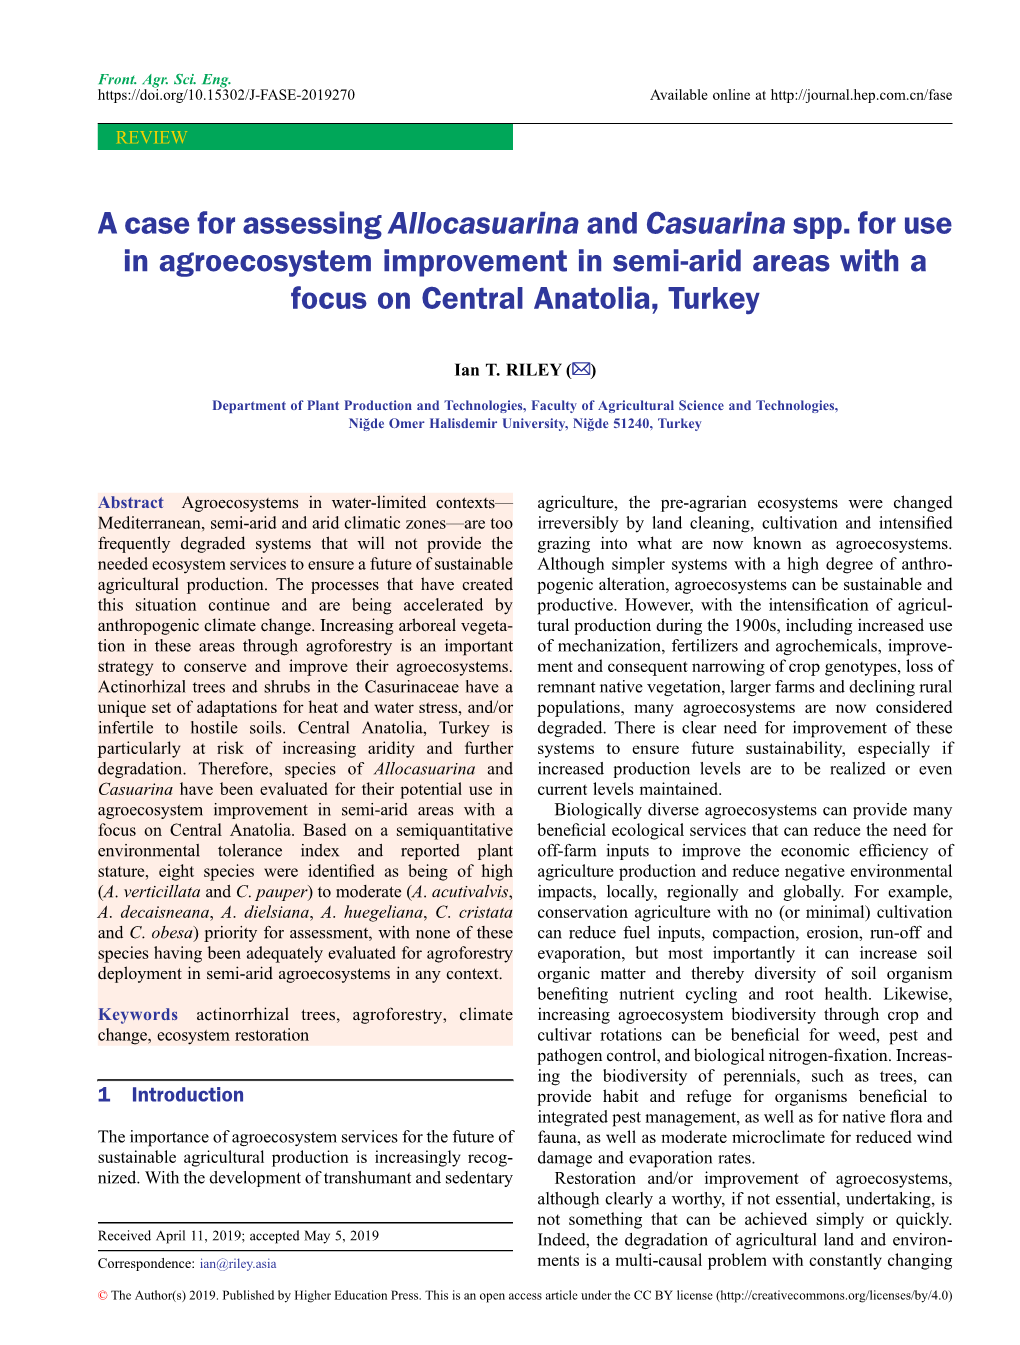 A Case for Assessing Allocasuarina and Casuarina Spp. for Use in Agroecosystem Improvement in Semi-Arid Areas with a Focus on Central Anatolia, Turkey